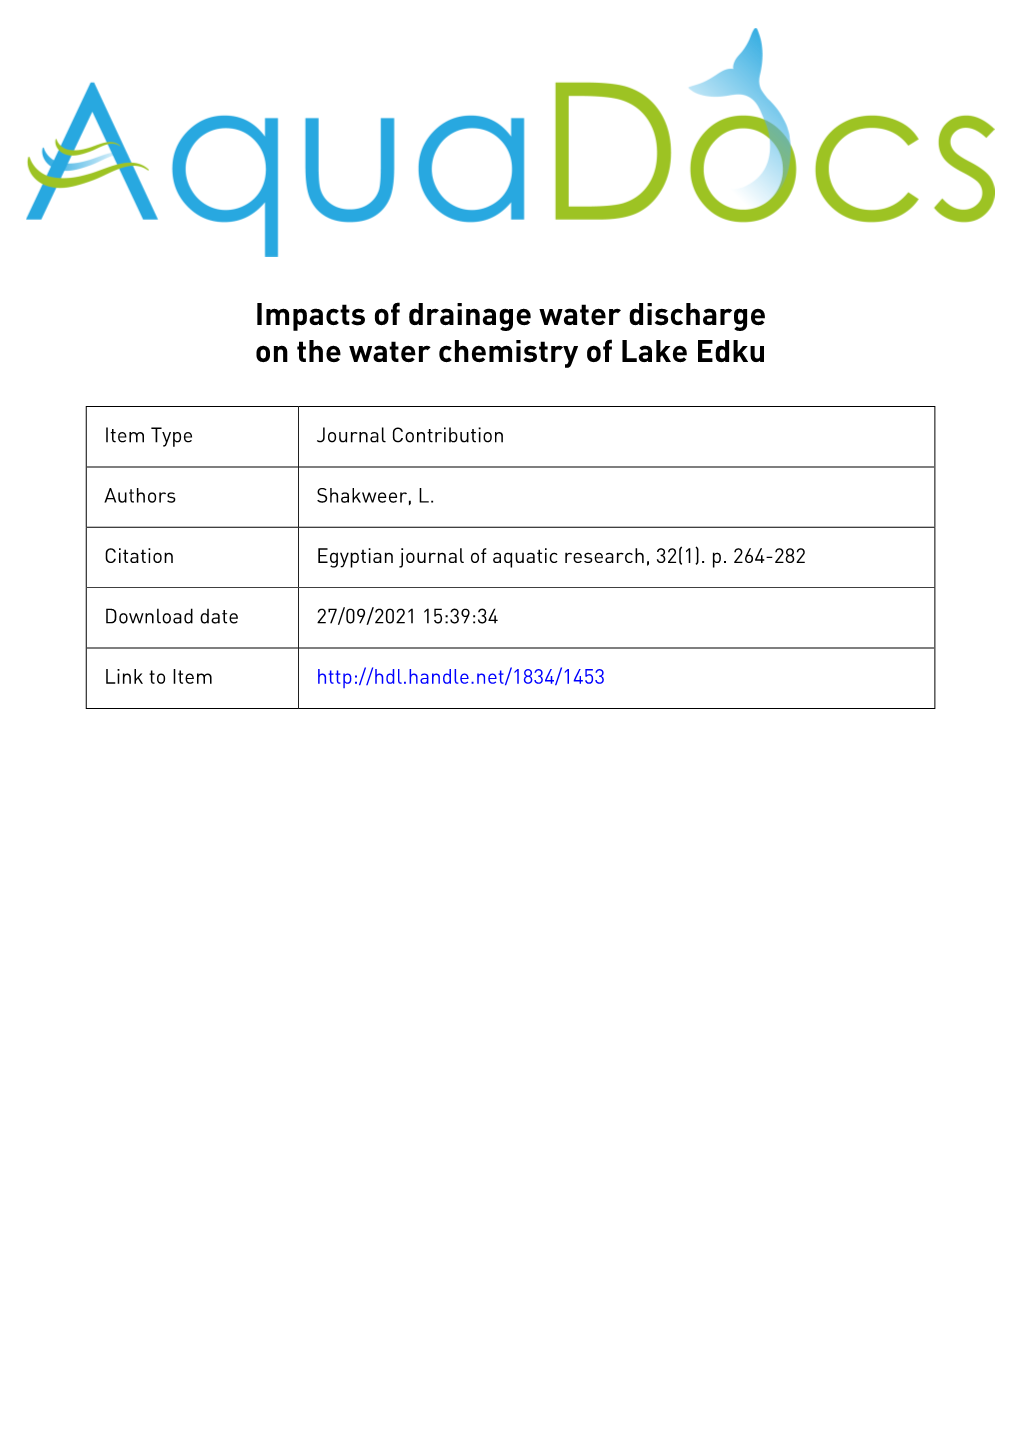 Impacts of Drainage Water Discharge on the Water Chemistry of Lake Edku